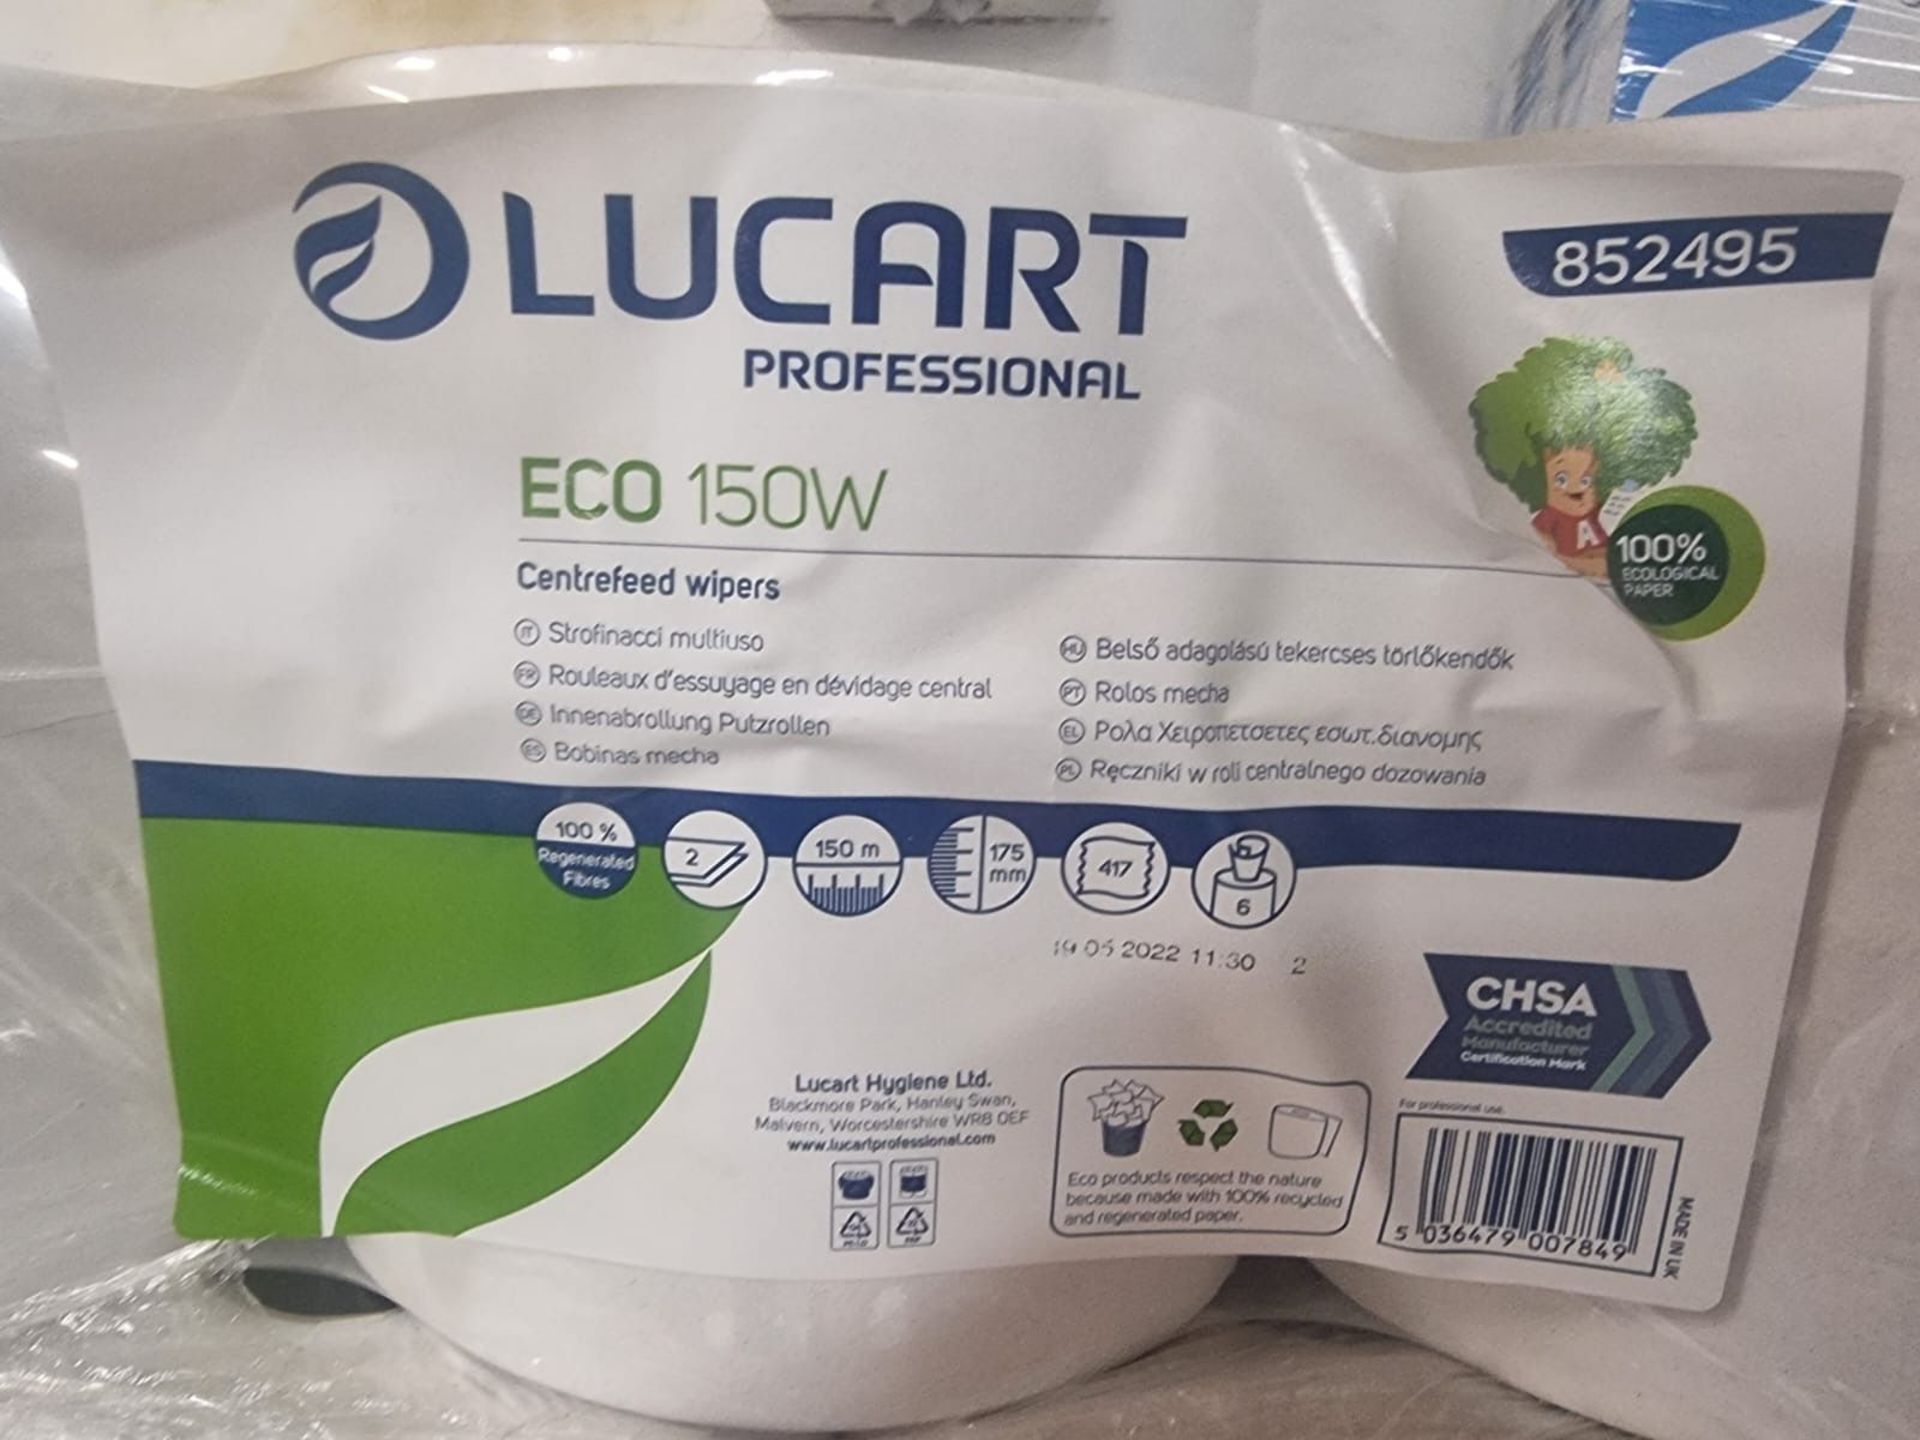 Pallet To Contain 24 x New Packs of 6 Lucart Professional Eco 150W Centrefeed Wipers. 150m x - Image 2 of 3